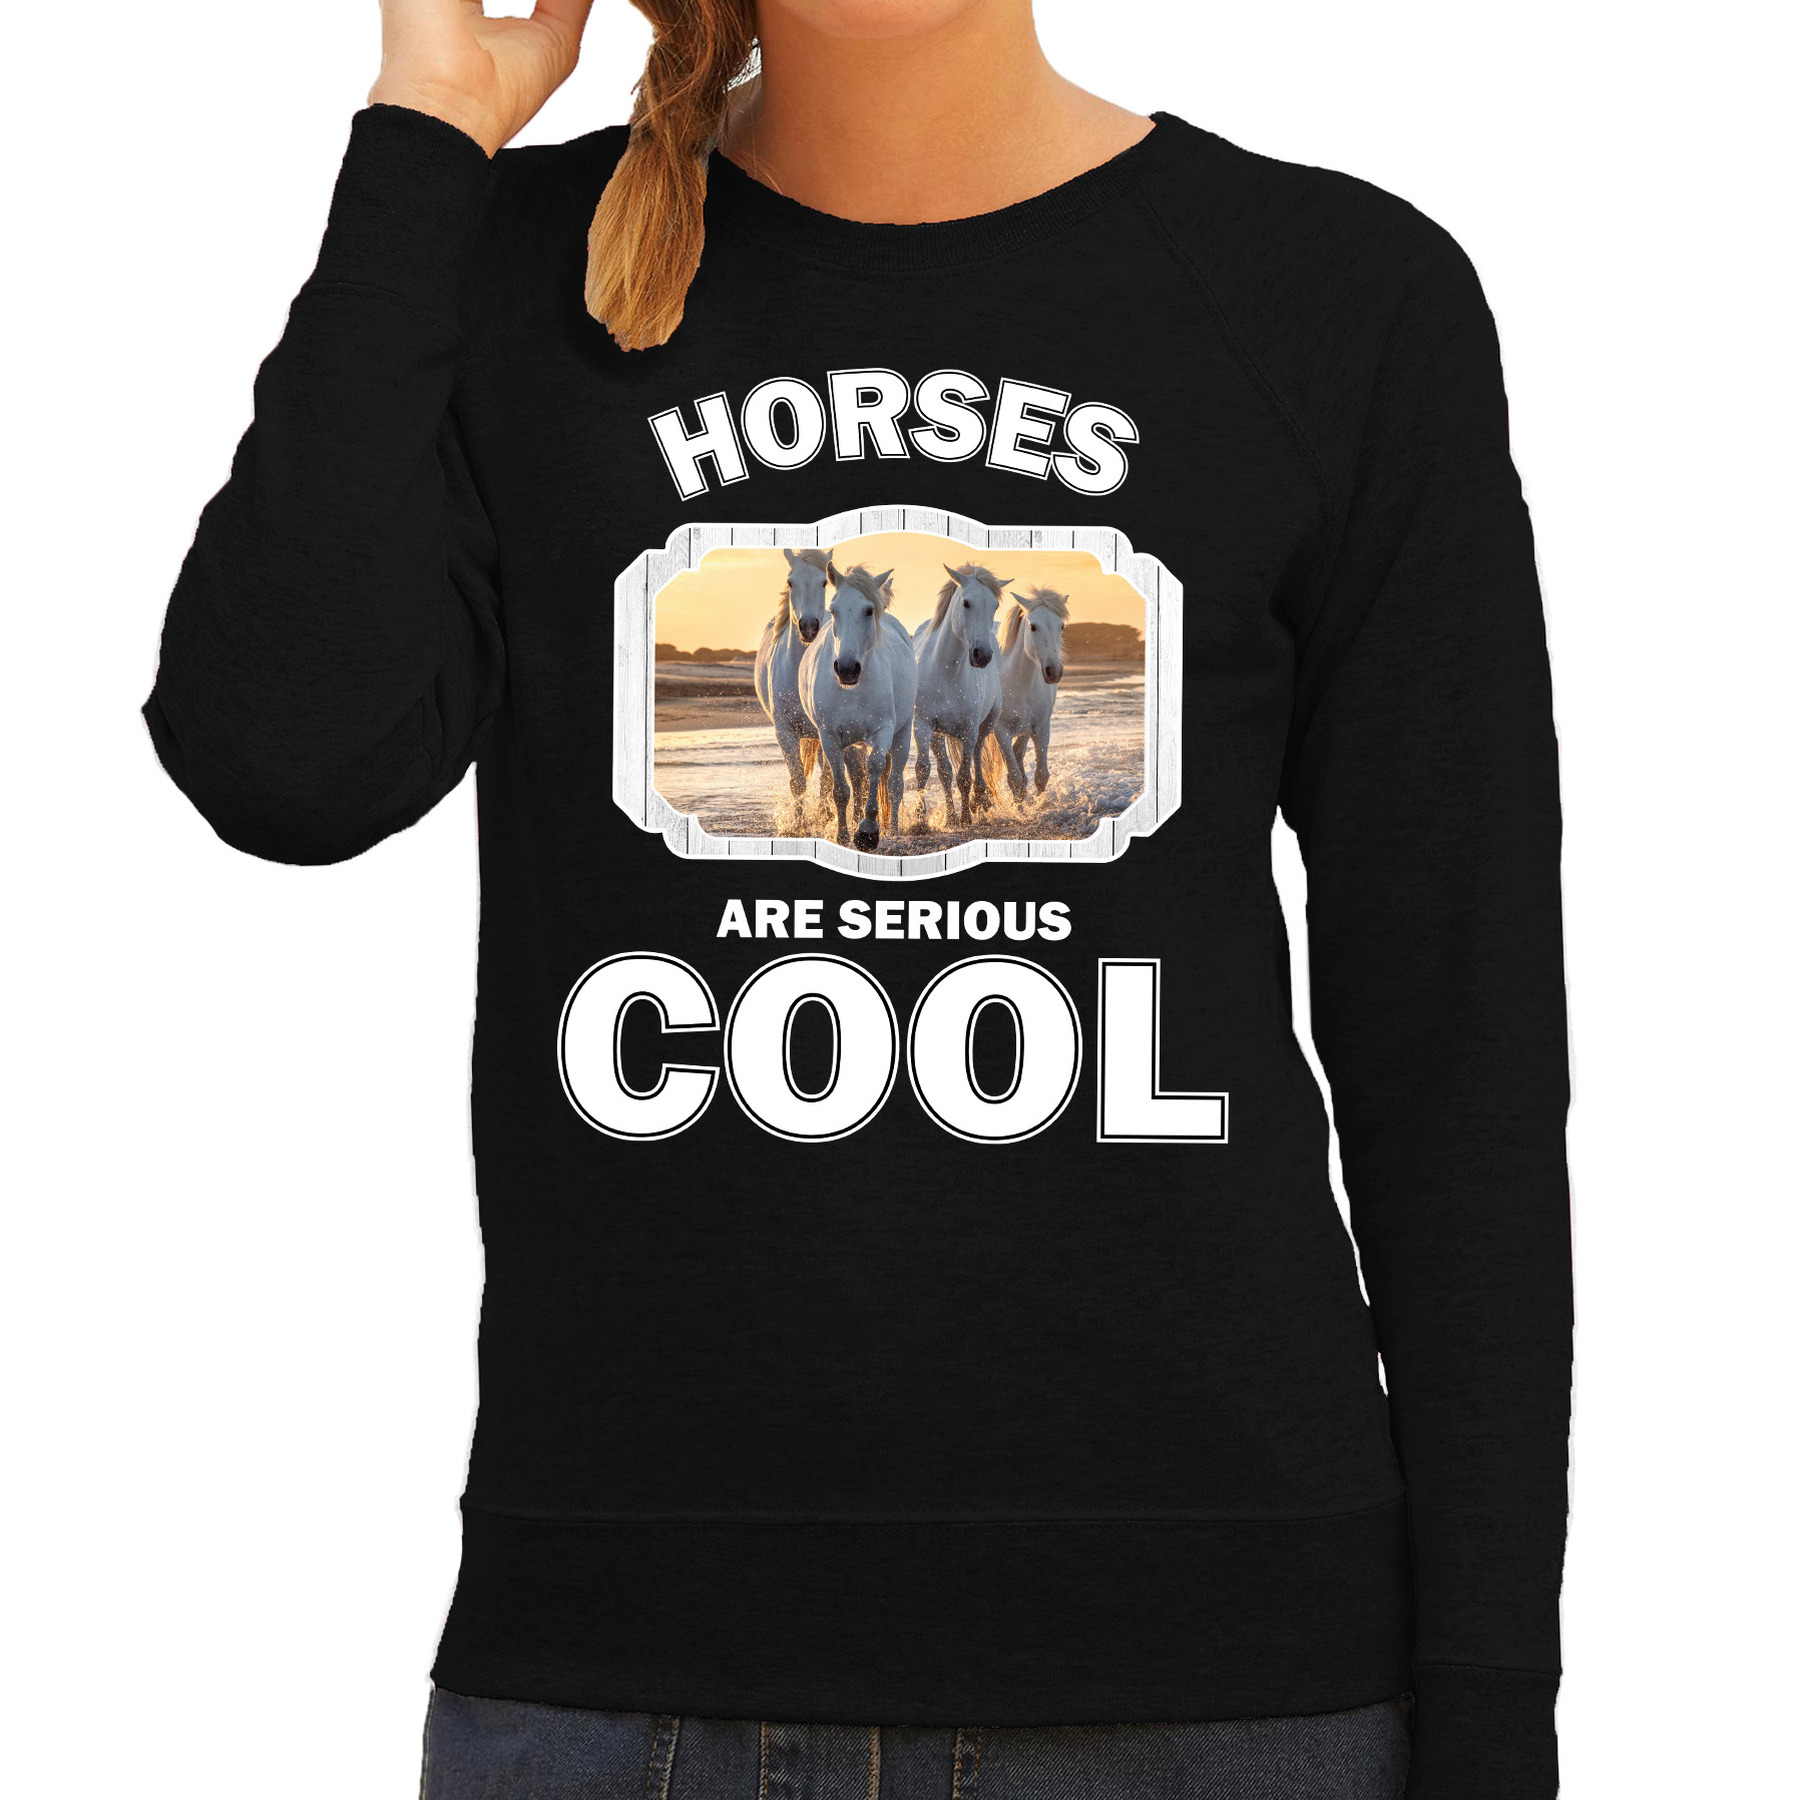 Sweater horses are serious cool zwart dames paarden- wit paard trui